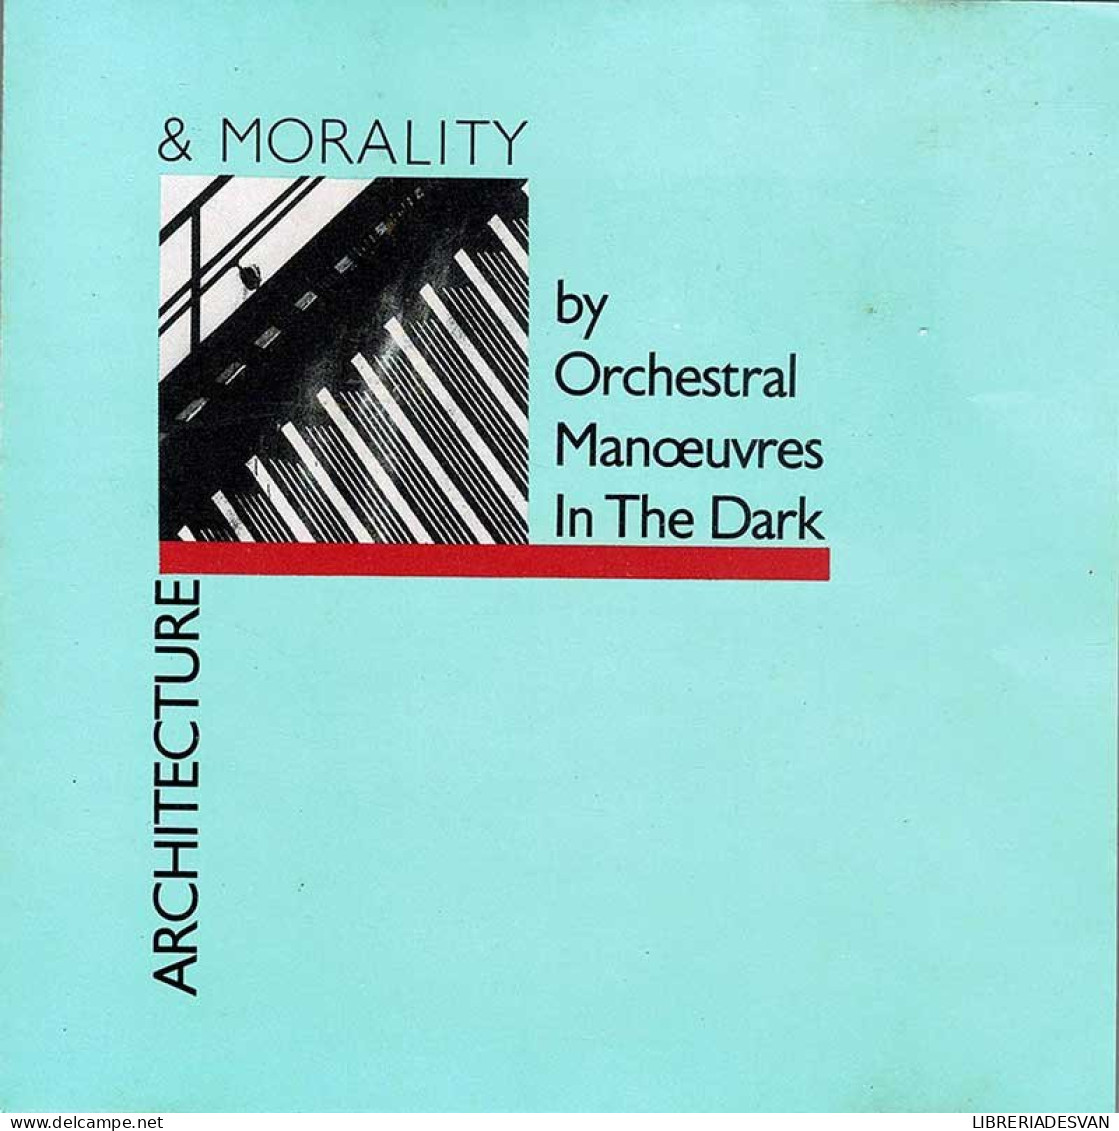 Orchestral Manoeuvres In The Dark - Architecture & Morality. CD - Dance, Techno & House